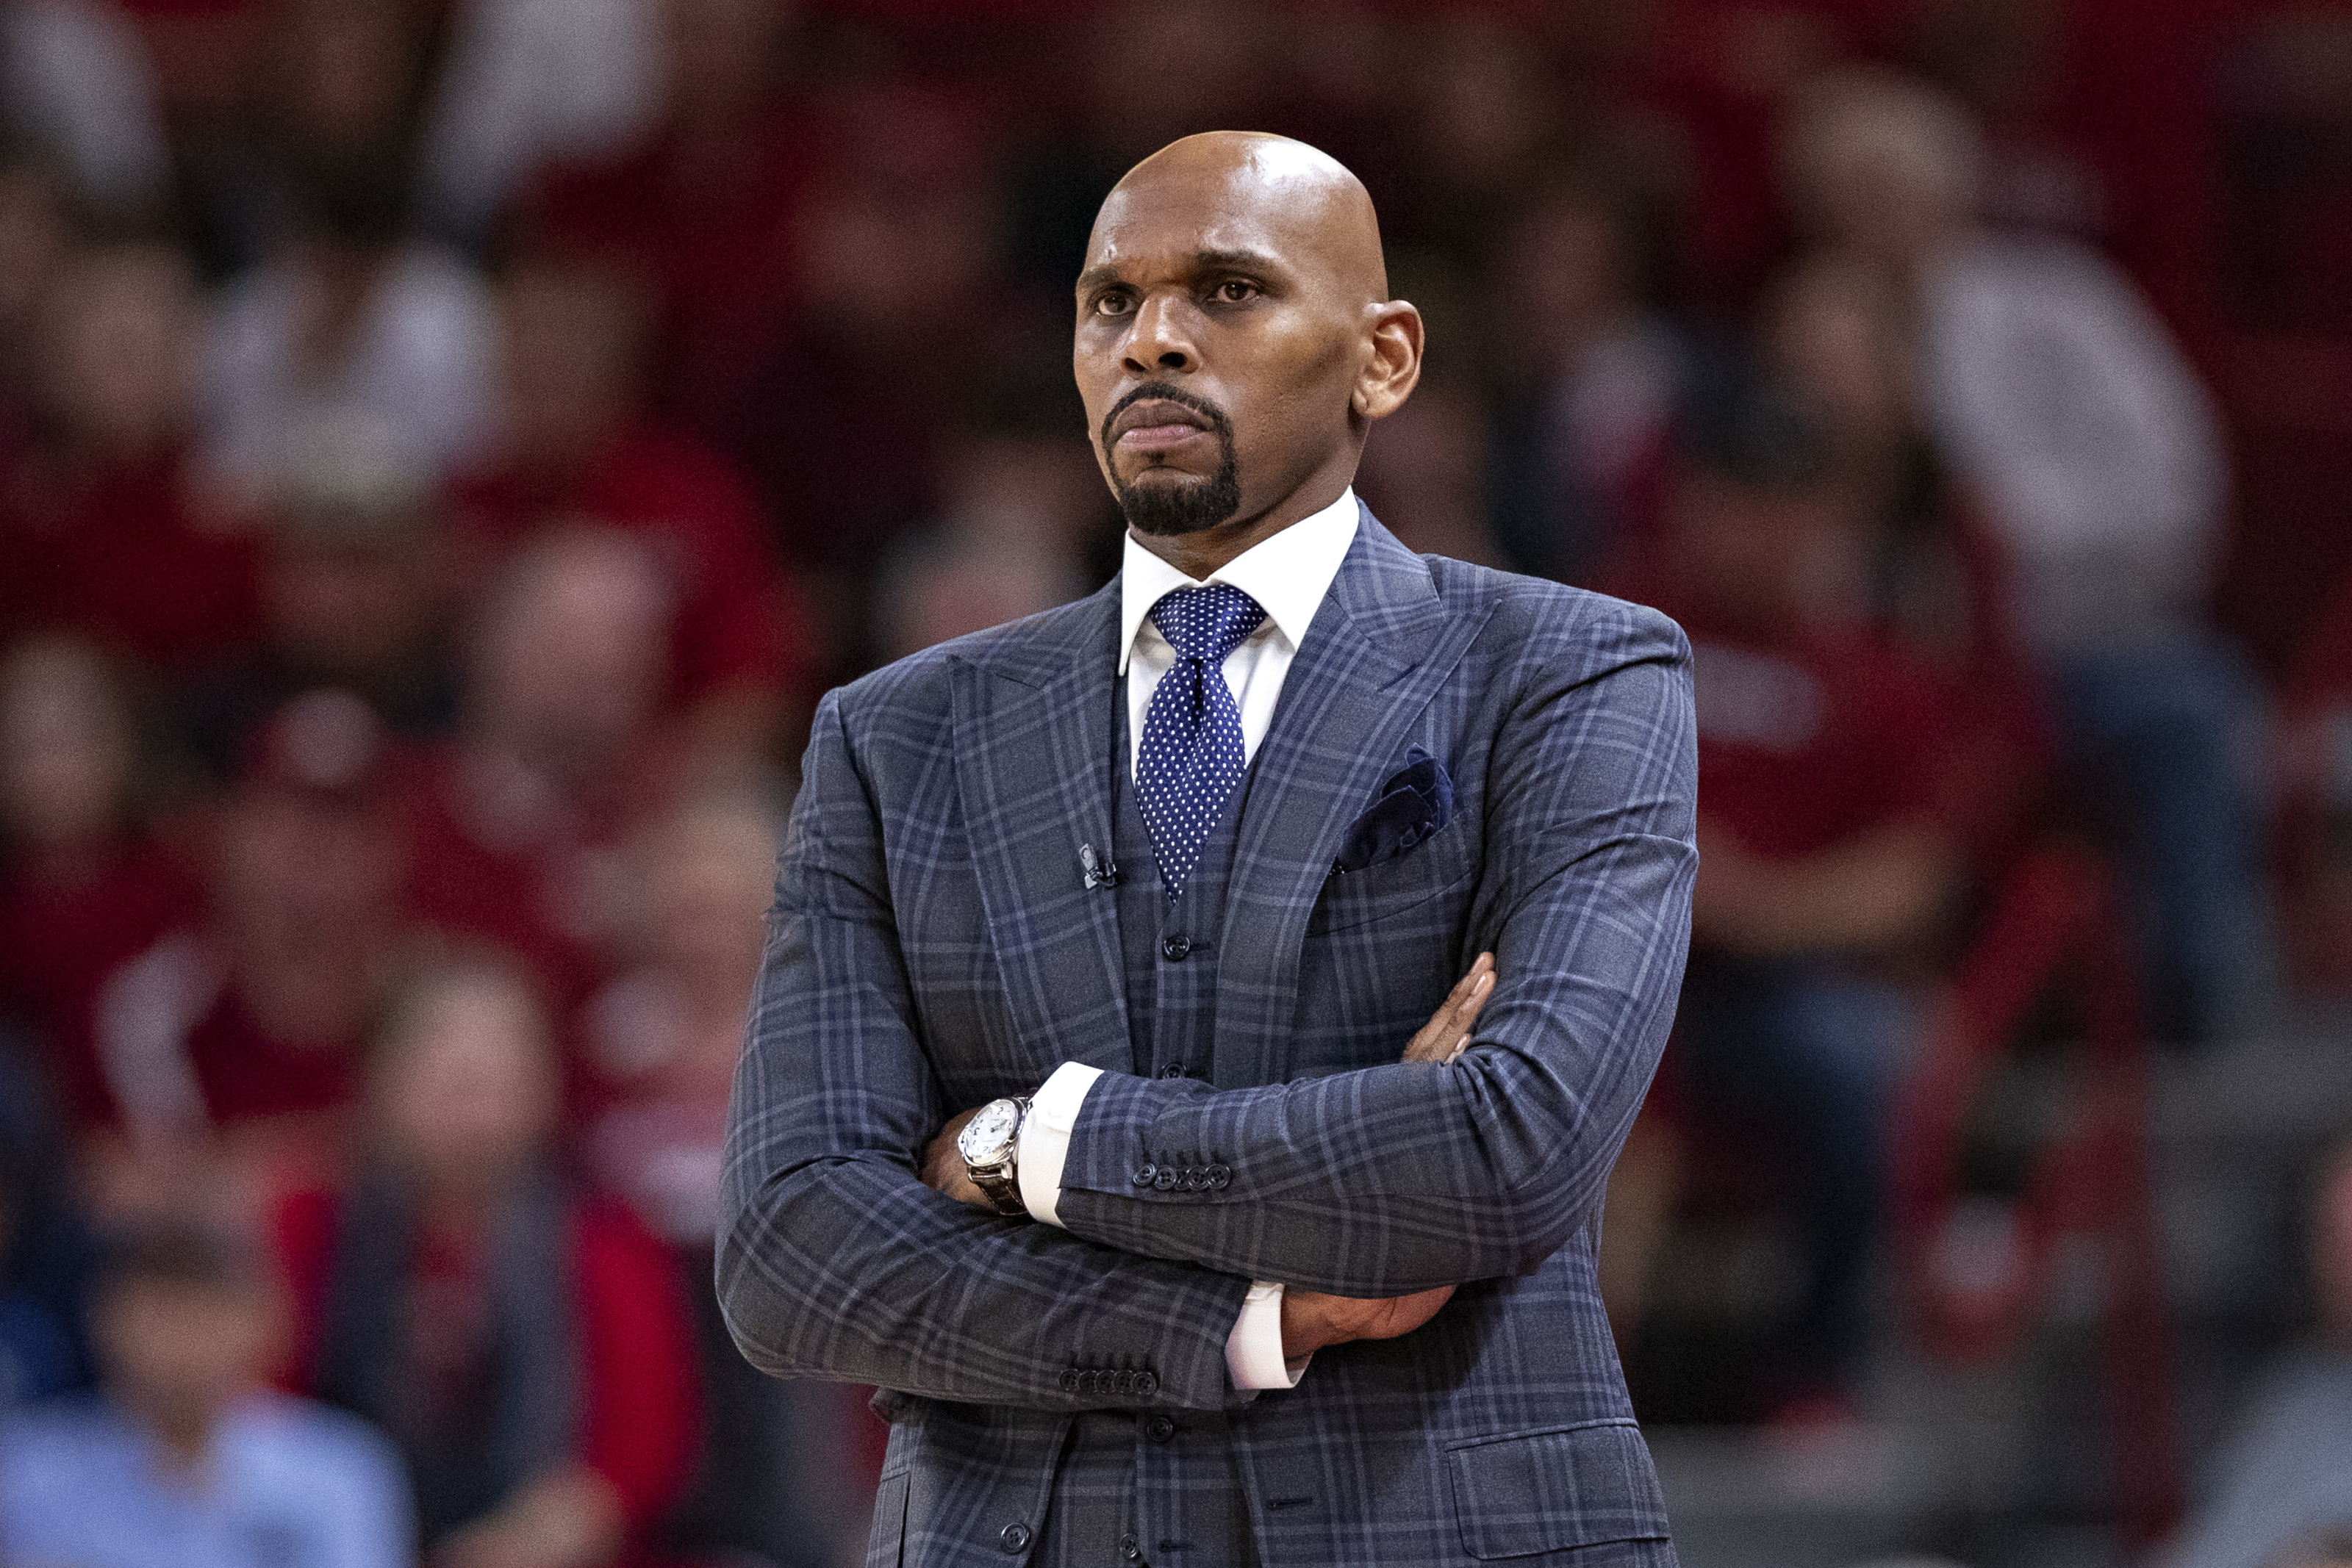 UNC Basketball: Why Jerry Stackhouse might not have gone to UNC